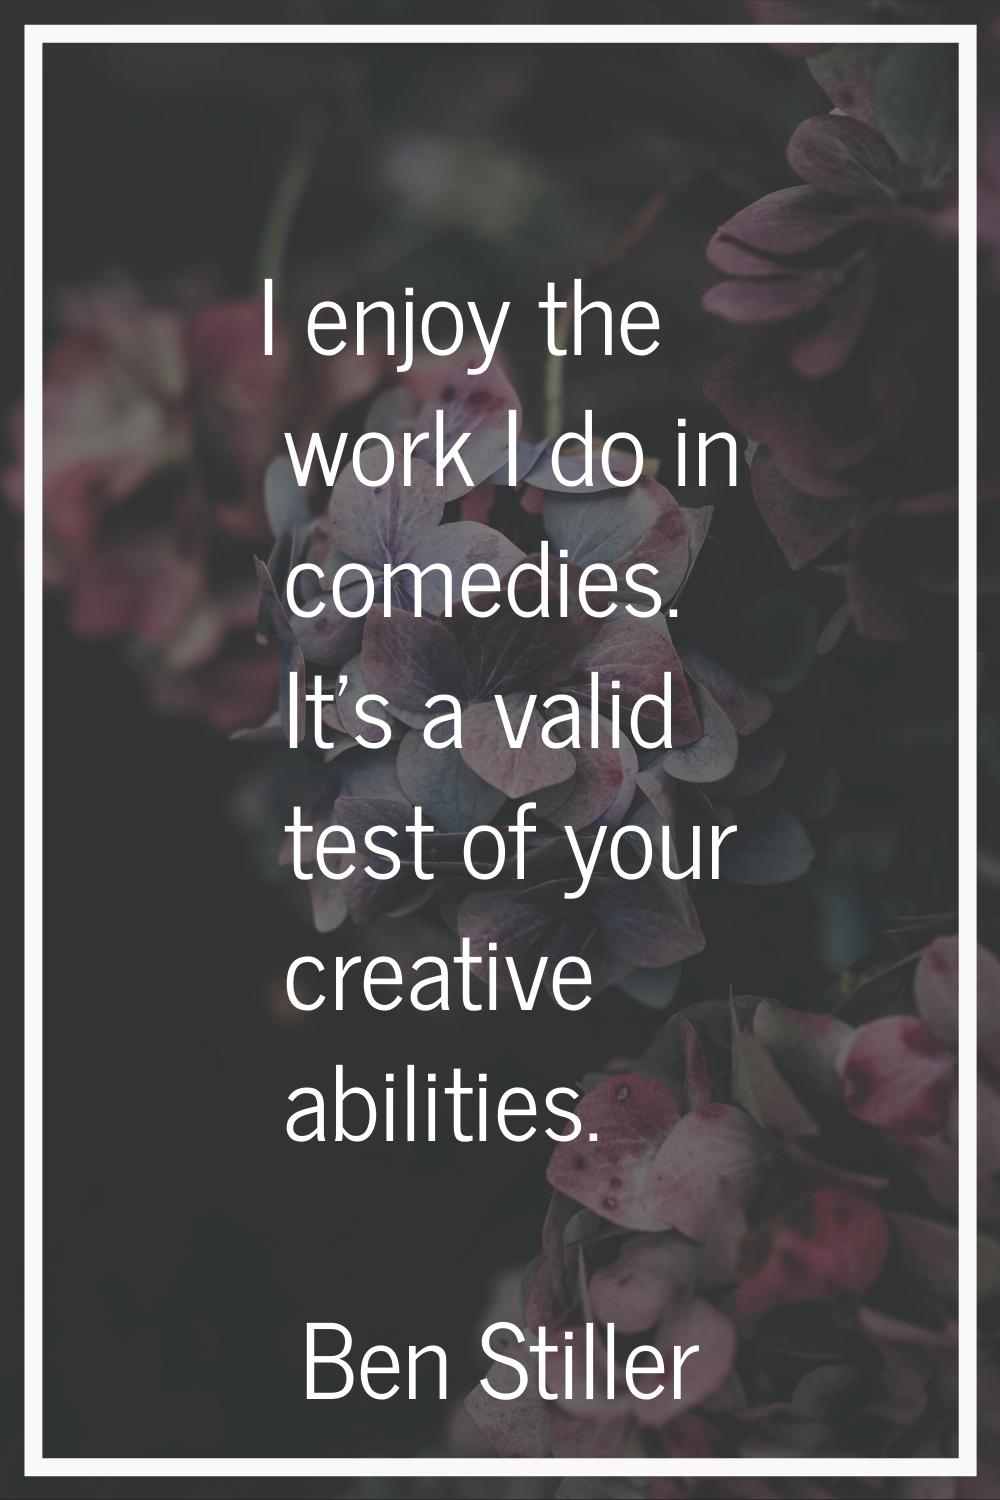 I enjoy the work I do in comedies. It's a valid test of your creative abilities.